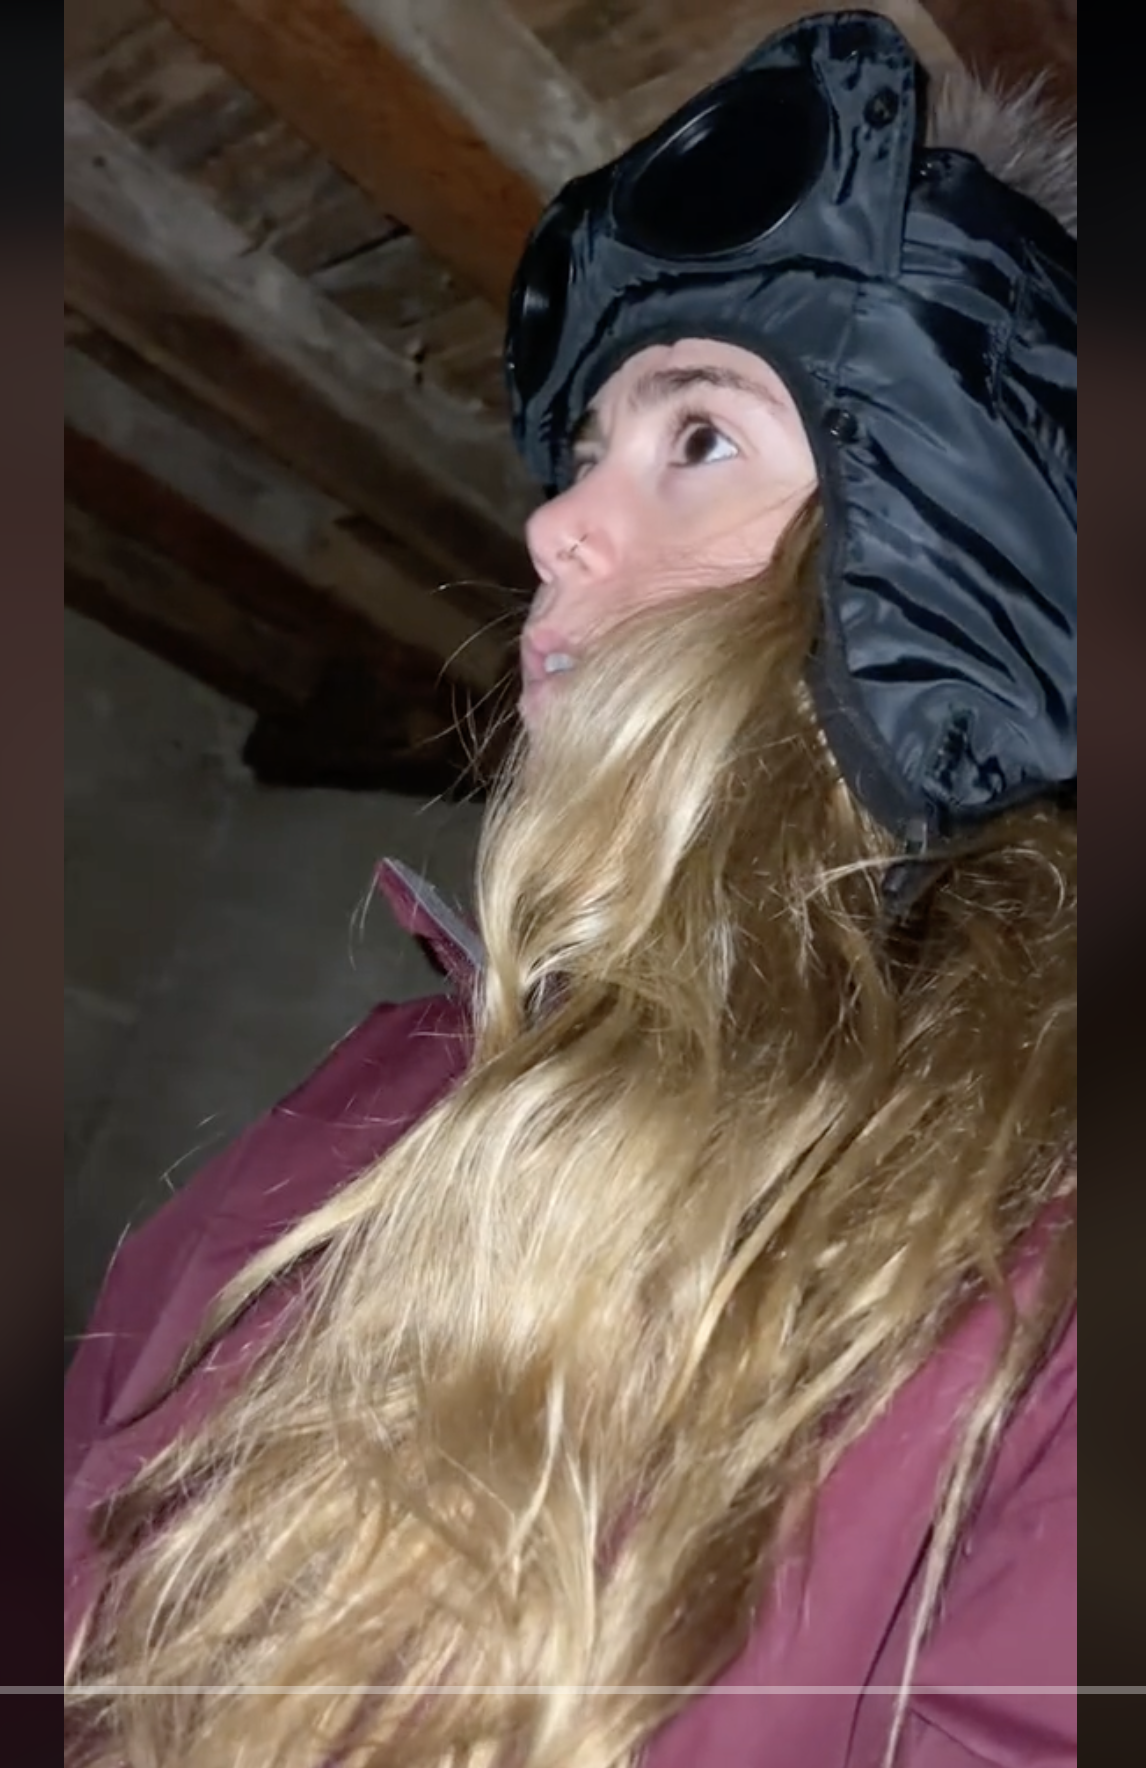 Julia Henning wearing a coat and ski mask while discovering the mysteries inside her home in a video dated June 16, 2023 | Source: tiktok.com/@iamjuliahenning